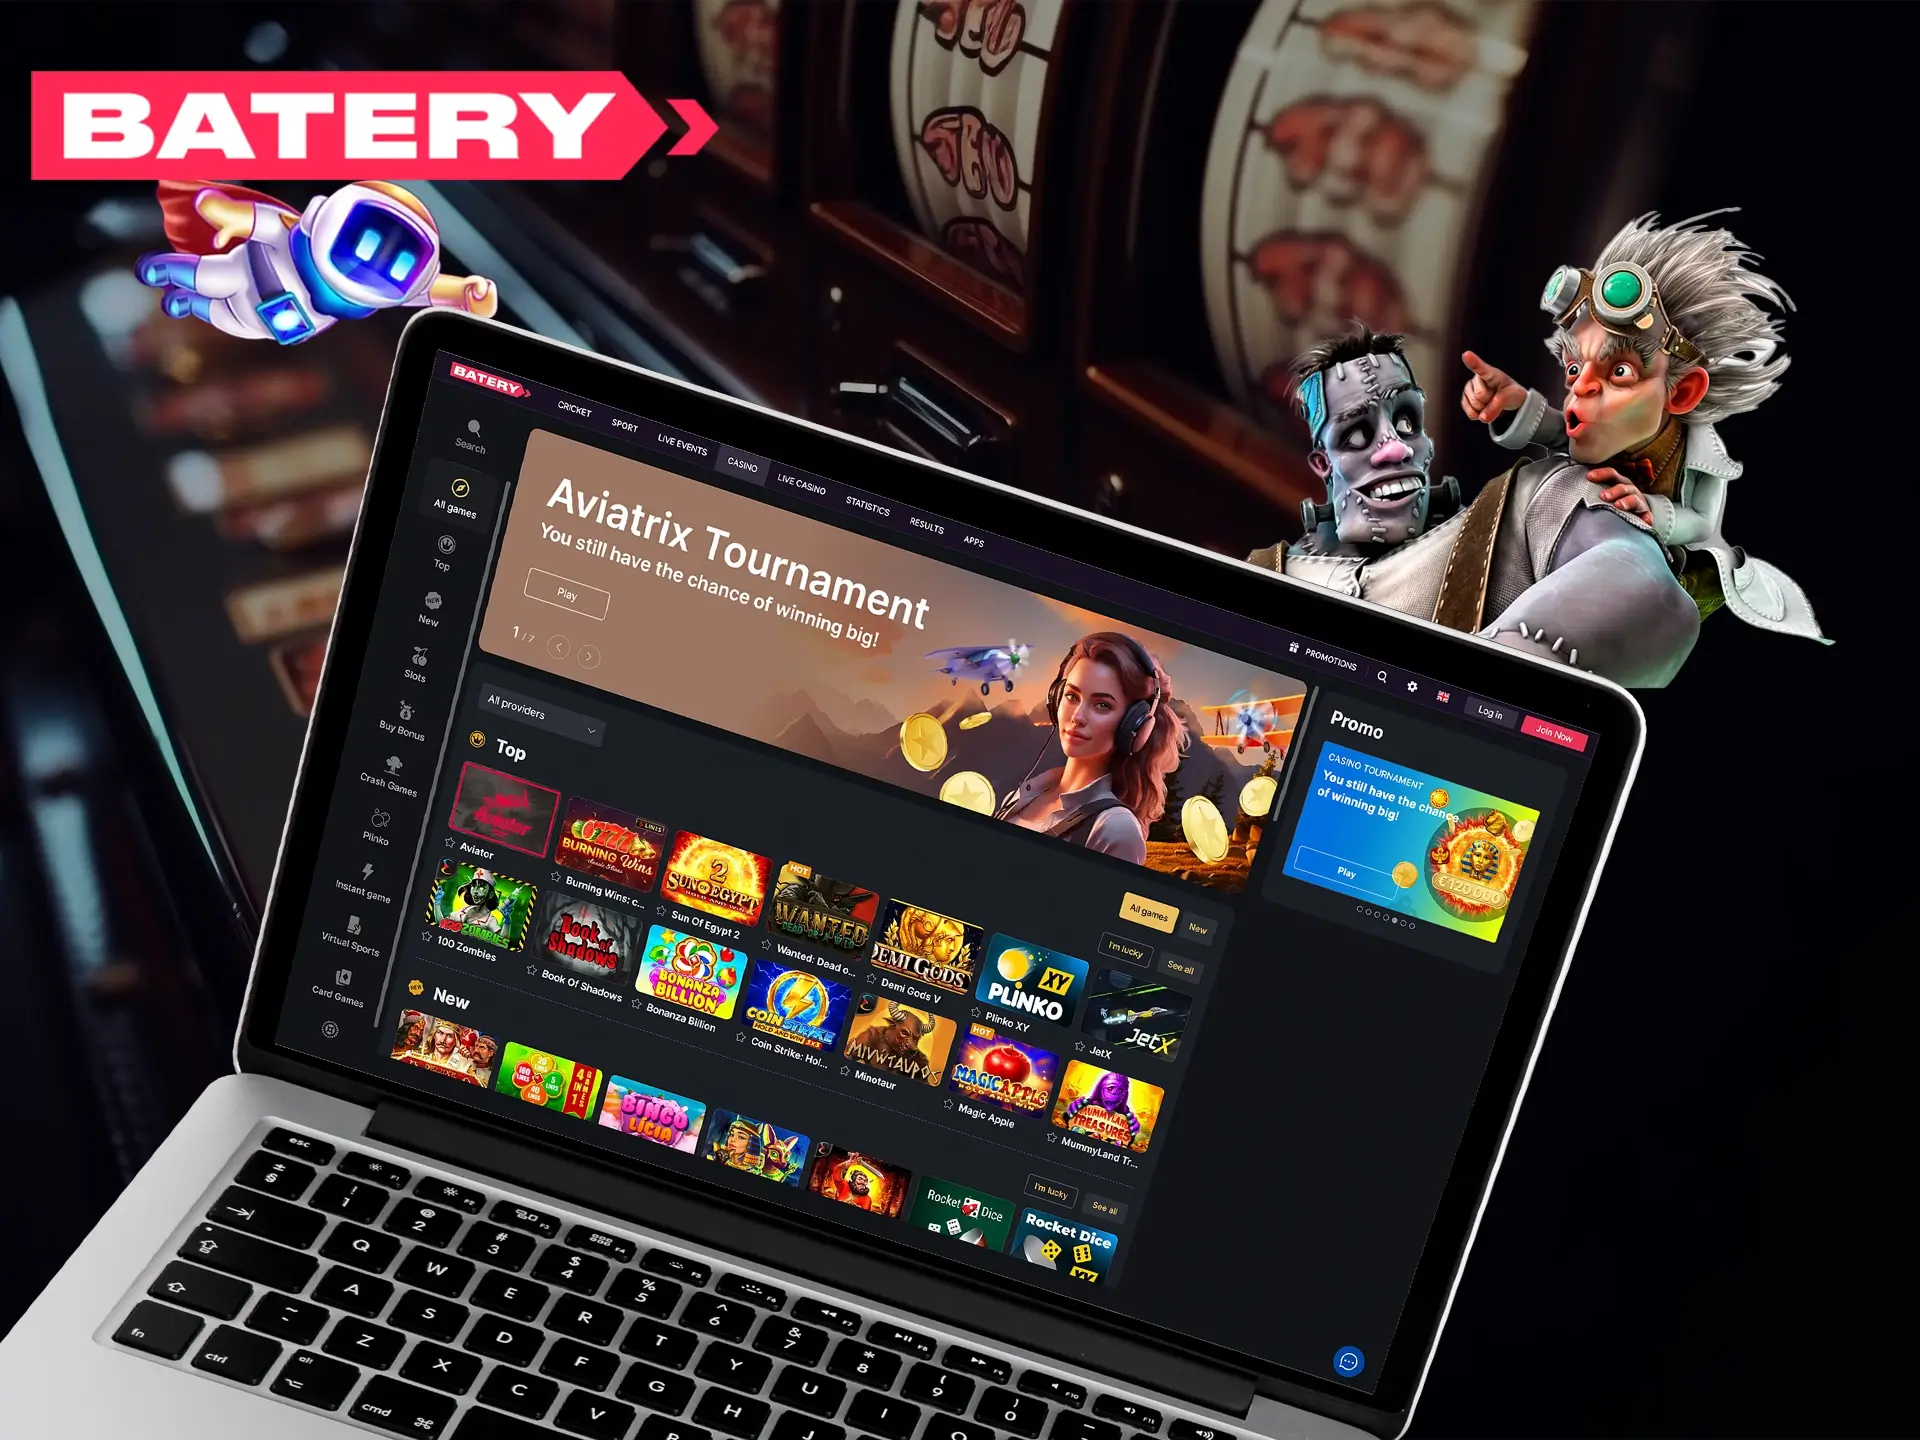 If you're a gambler, you're sure to find something to do at Casino by Batery.